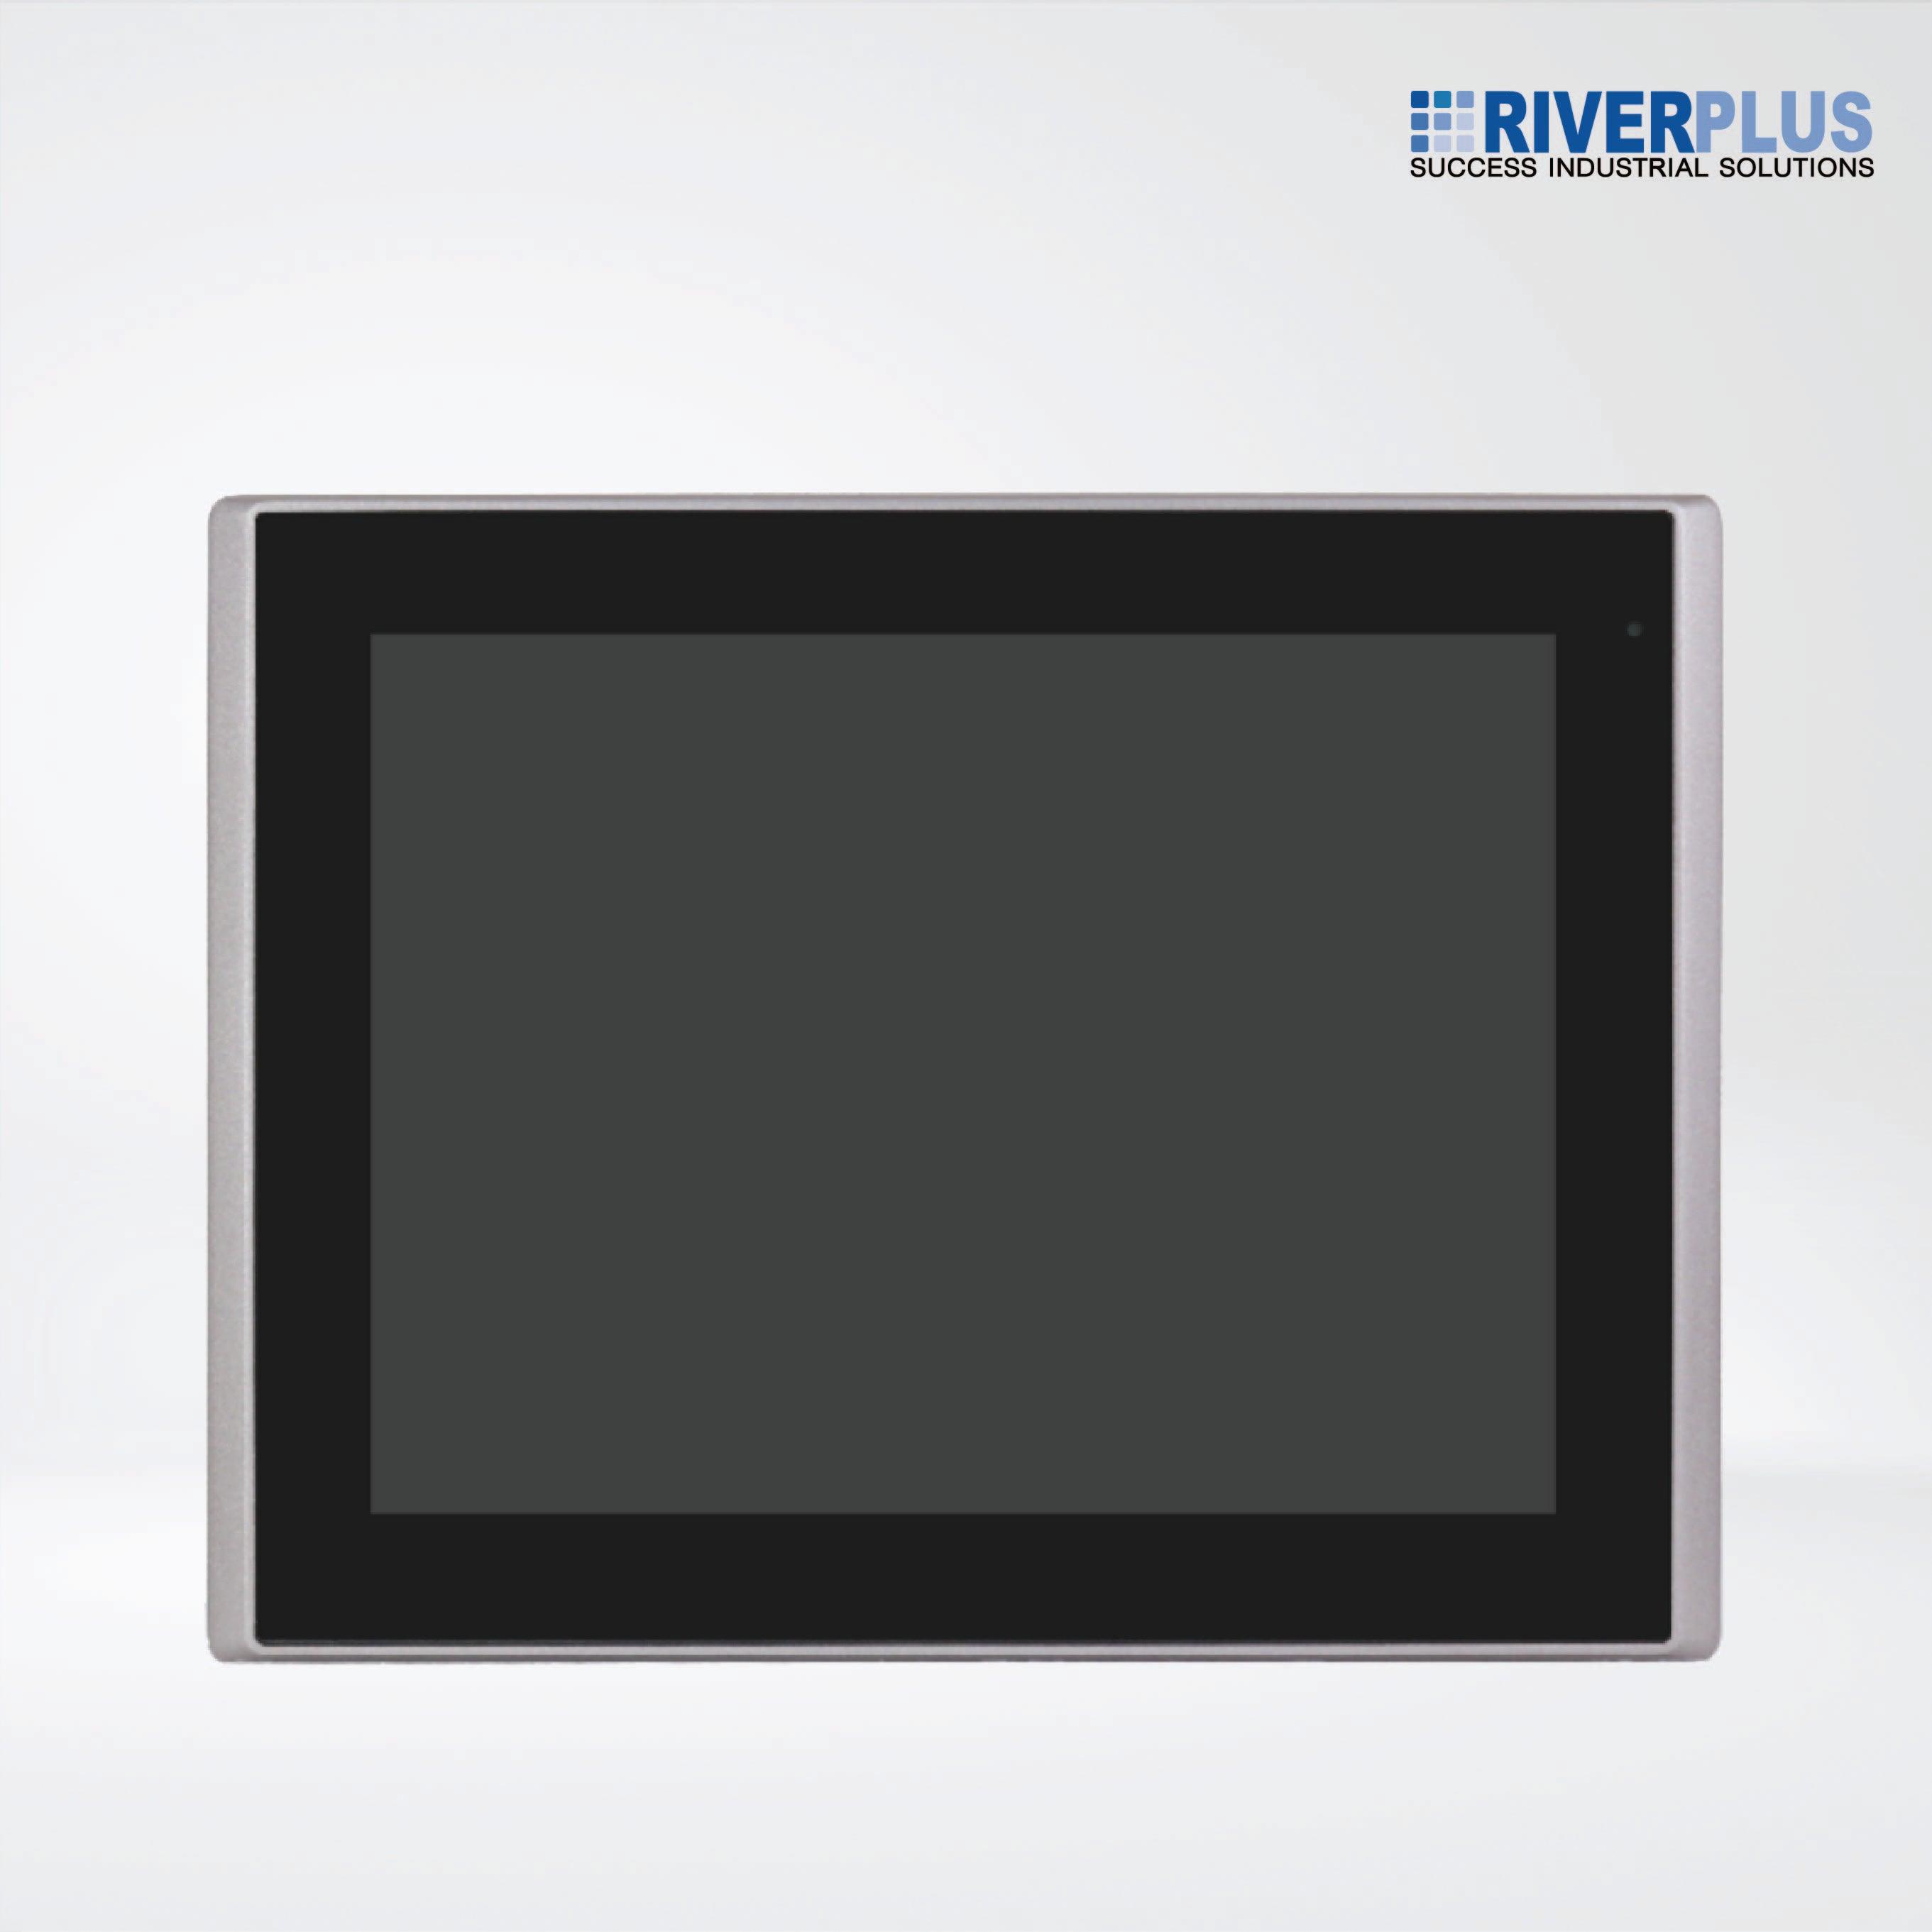 ARCHMI-812P New Generation Low Power Consumption HMI/Innovationg Fast, Bay Trail Solution - Riverplus